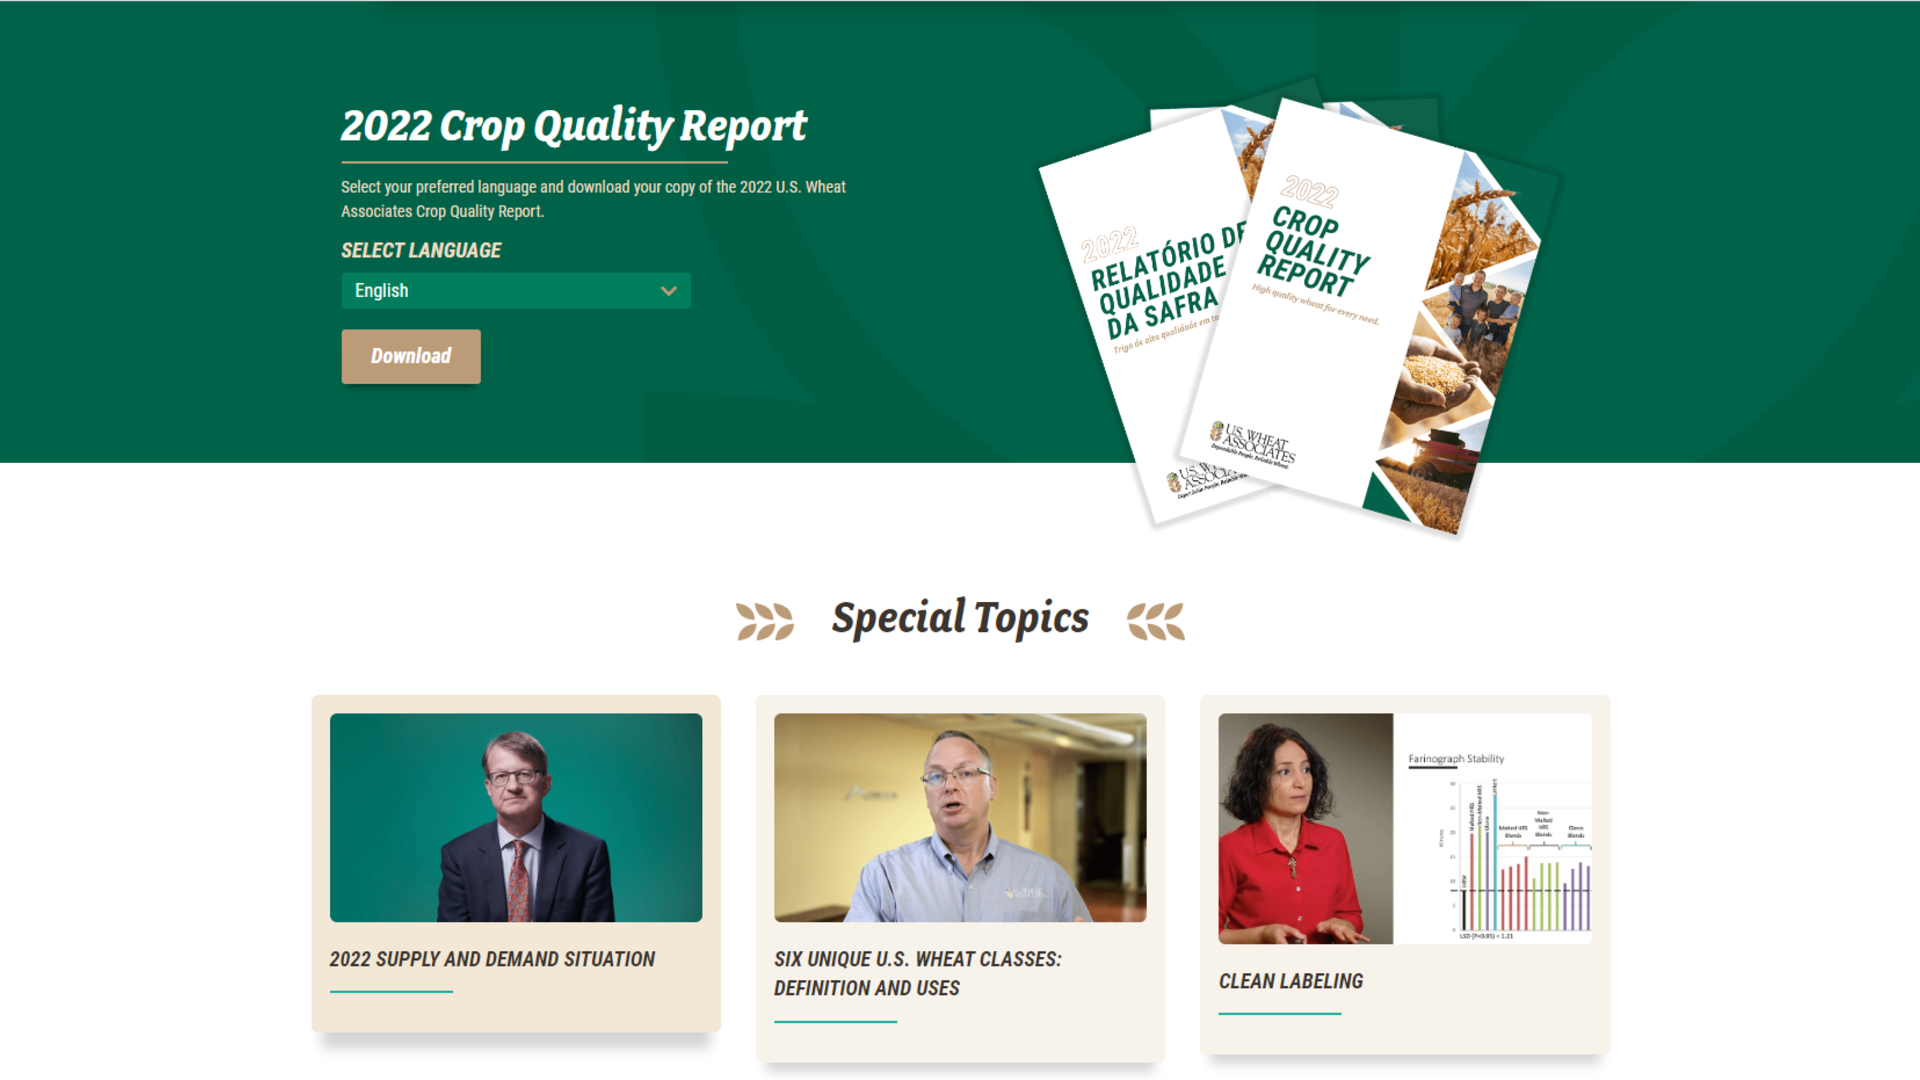 U.S. Wheat 2022 Crop Quality Videos Available